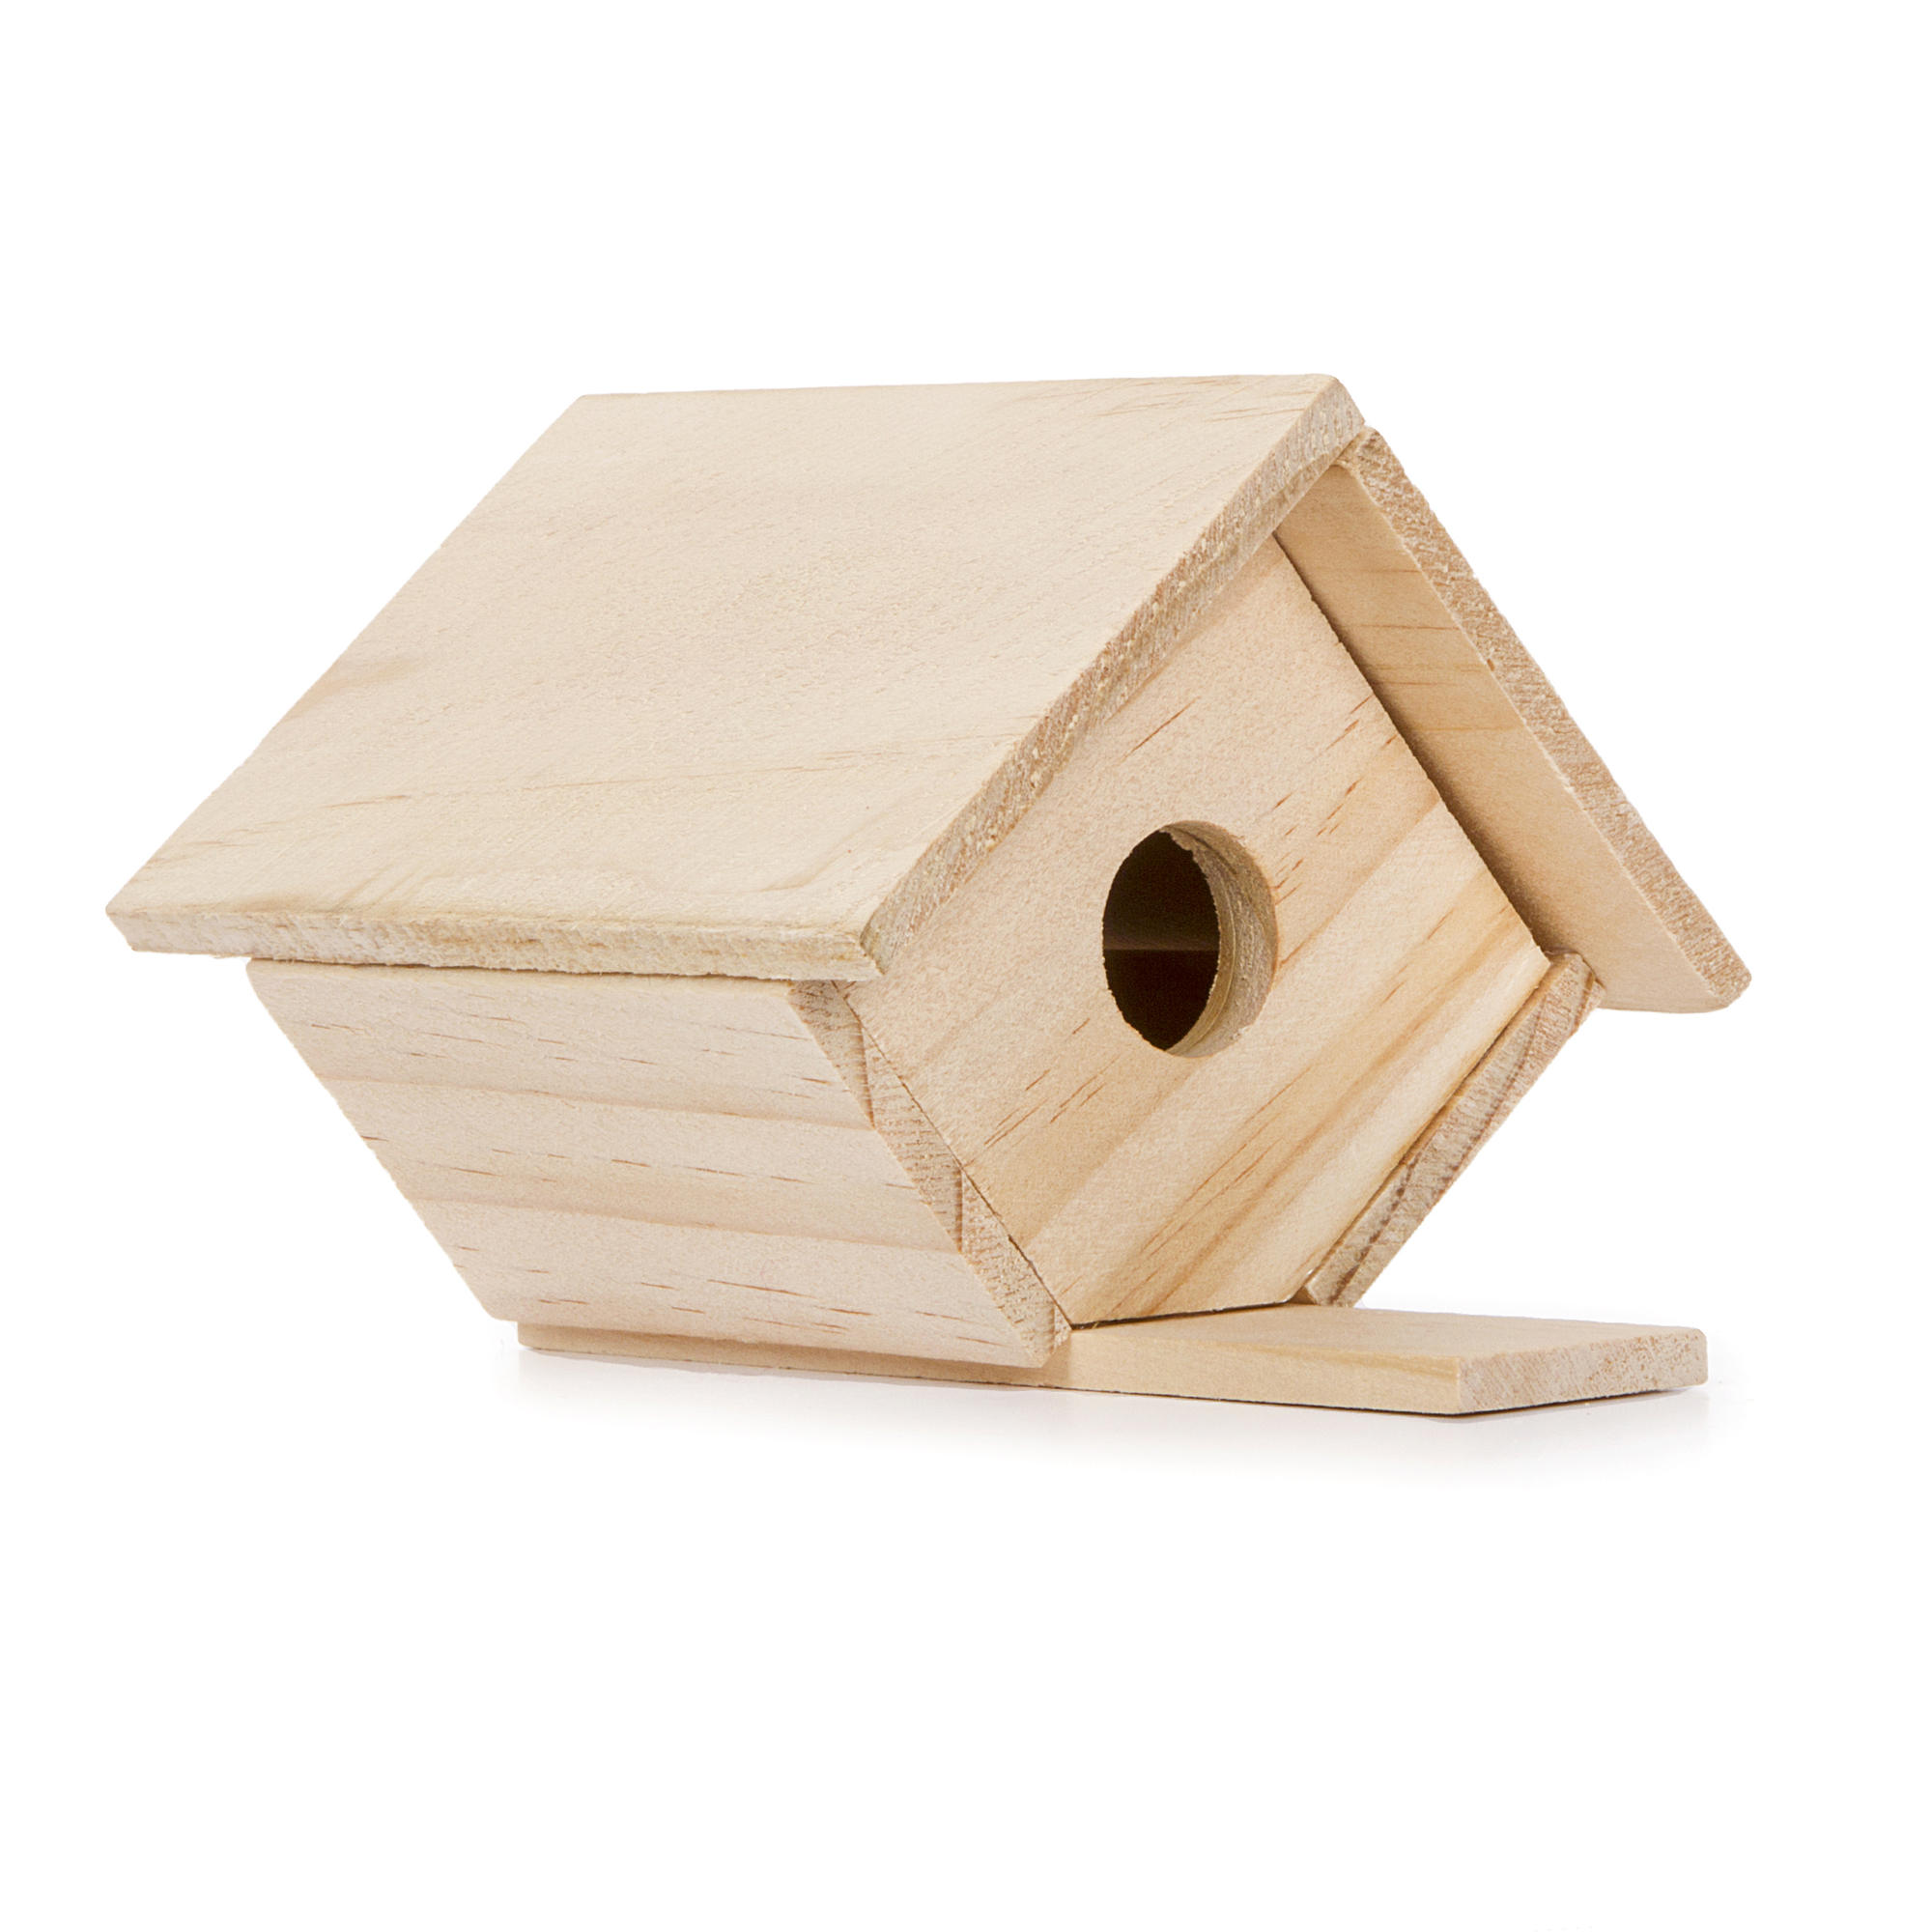 Find the Darice® Birdhouse Wood Model Kit at Michaels